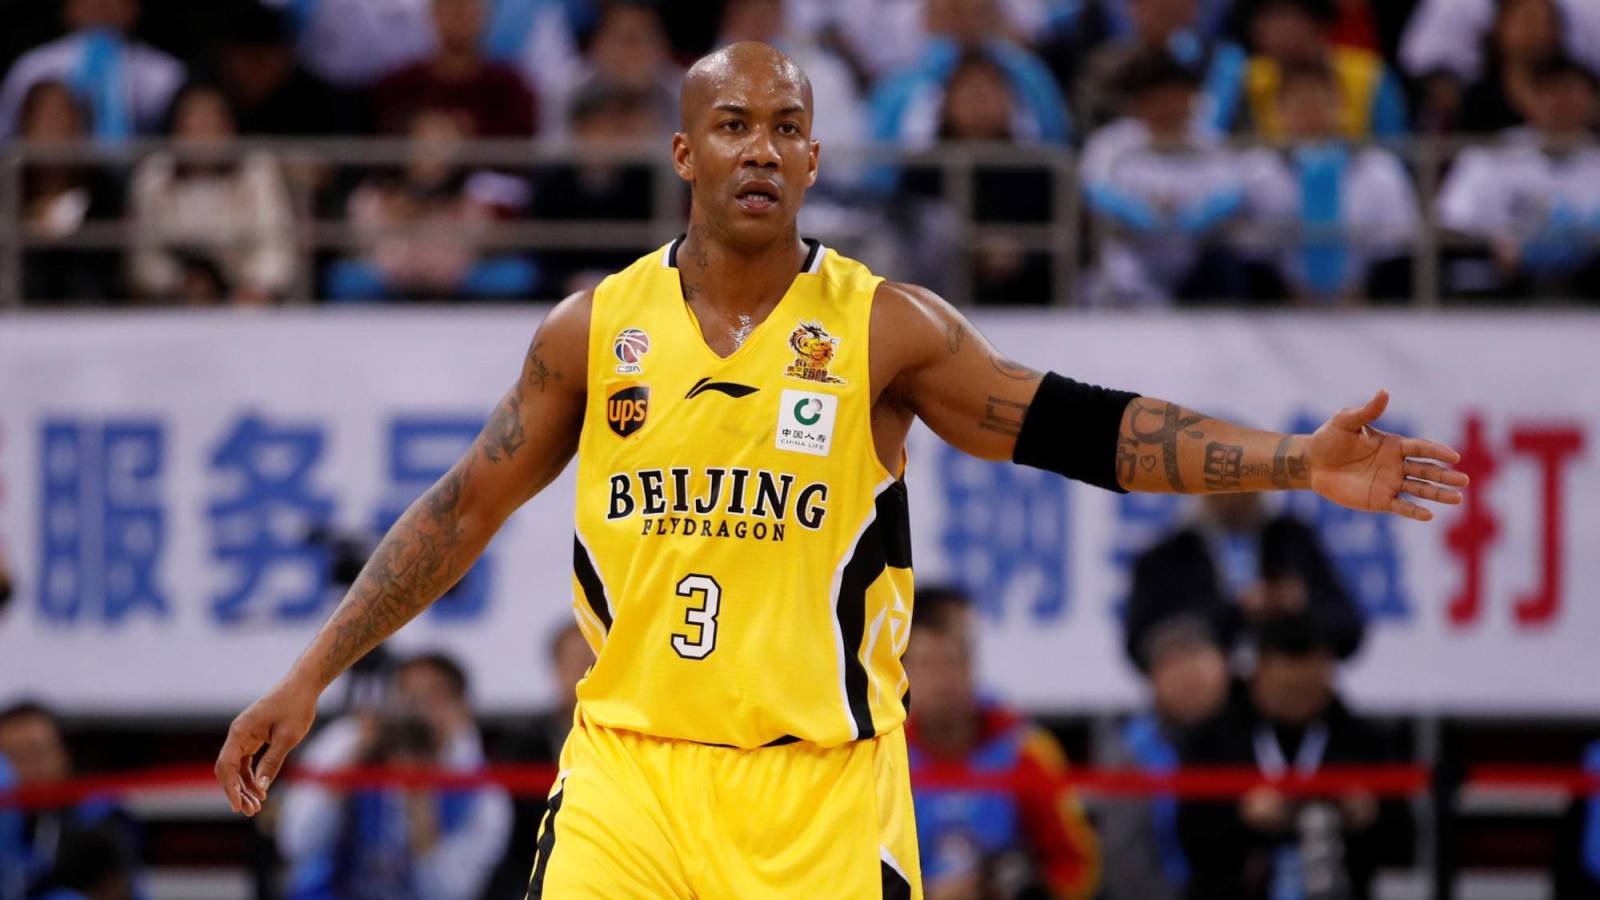 AGR Jersey of the Week(end): Stephon Marbury on the Minnesota Timberwolves